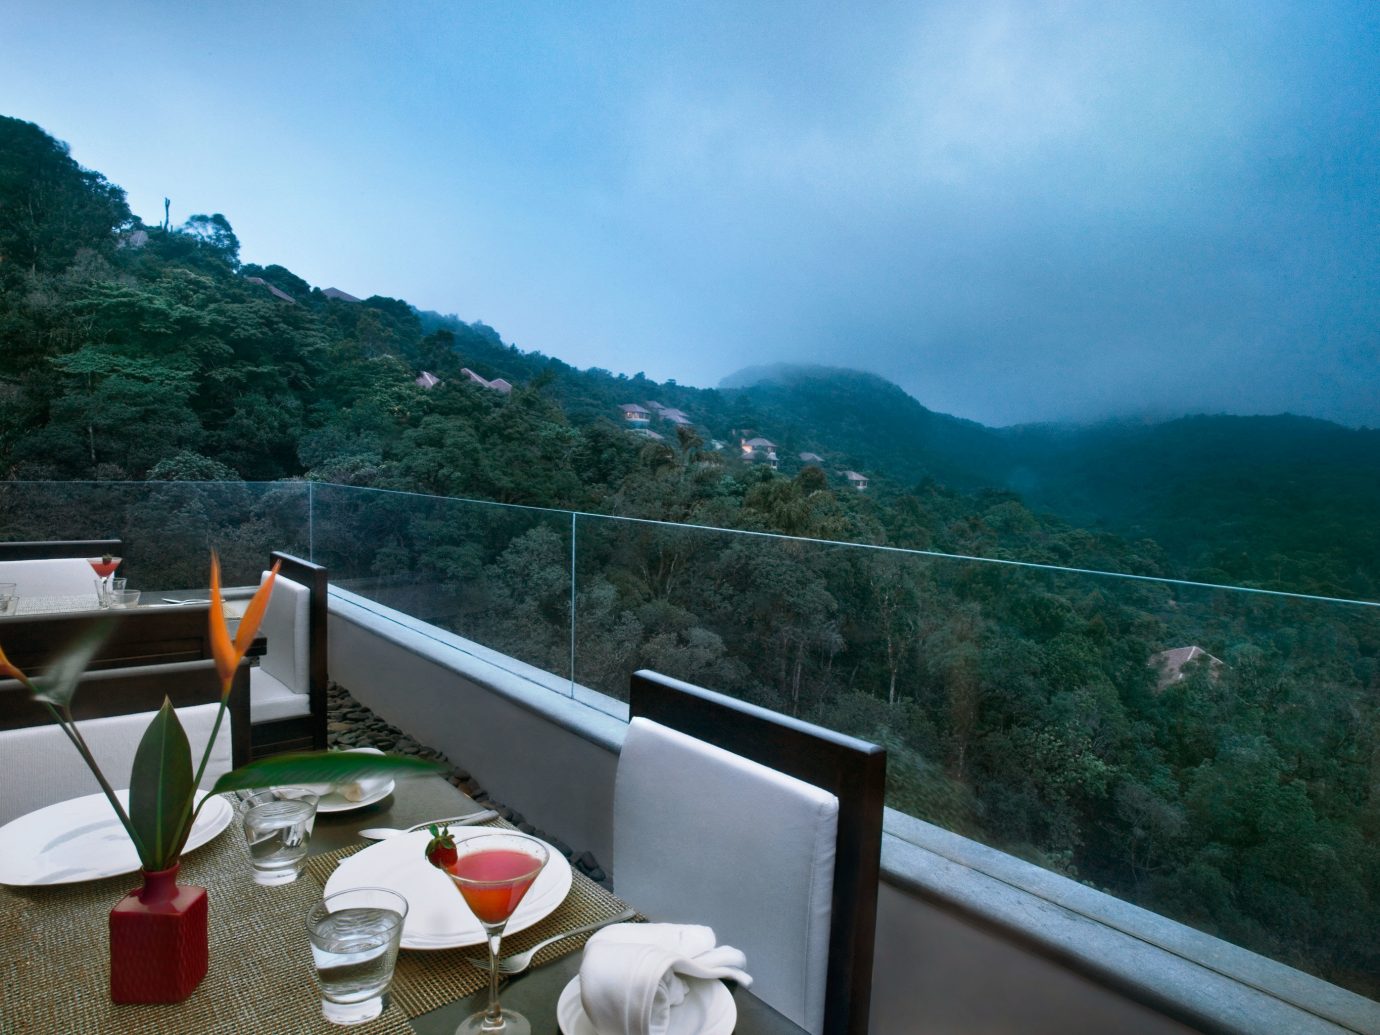 Balcony Dining Drink Eat Elegant Forest Hotels Luxury Patio Scenic views Terrace outdoor mountain vacation tourism travel Sea mountain range